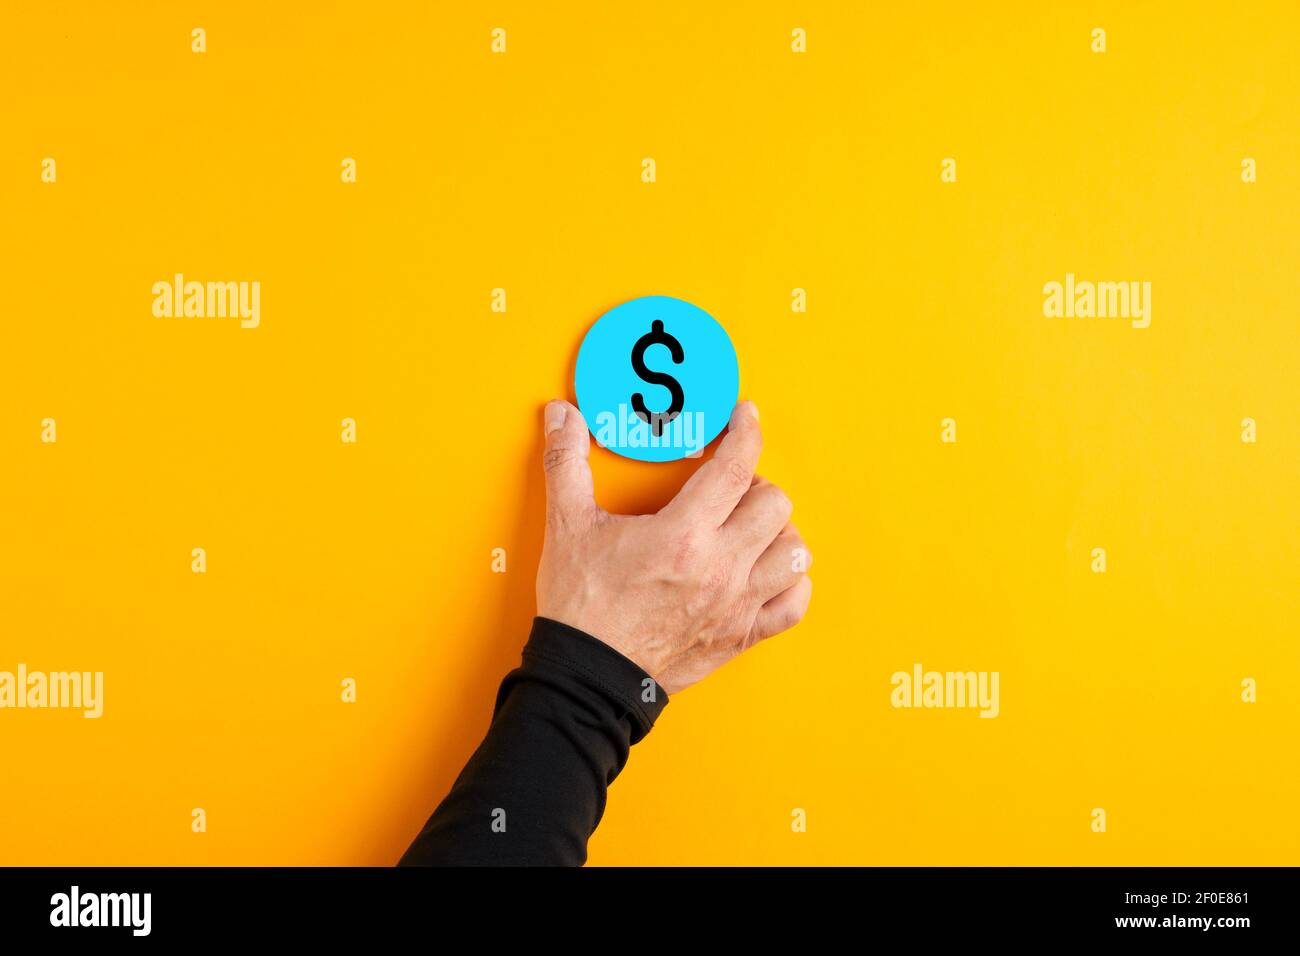 Male hand placing a blue badge with a US dollar currency sign on yellow background. Stock Photo